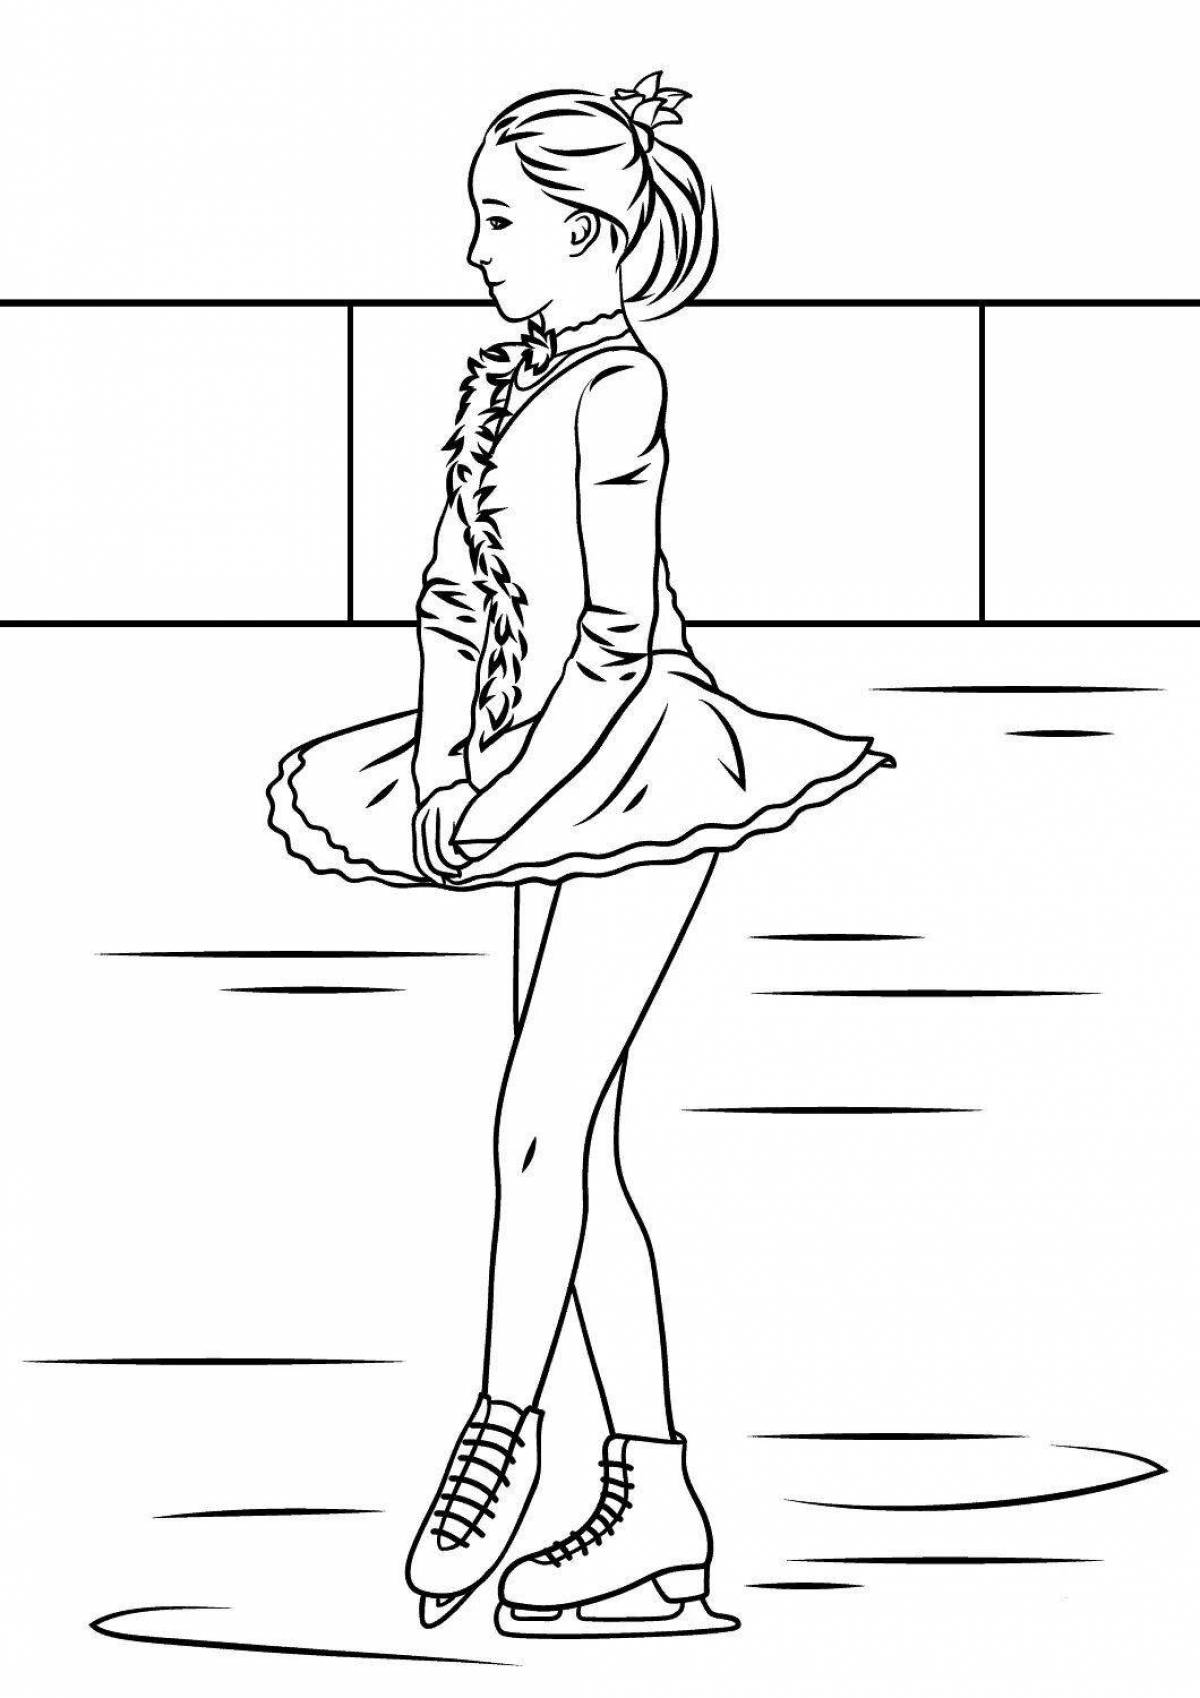 Fancy figure skater coloring pages for kids